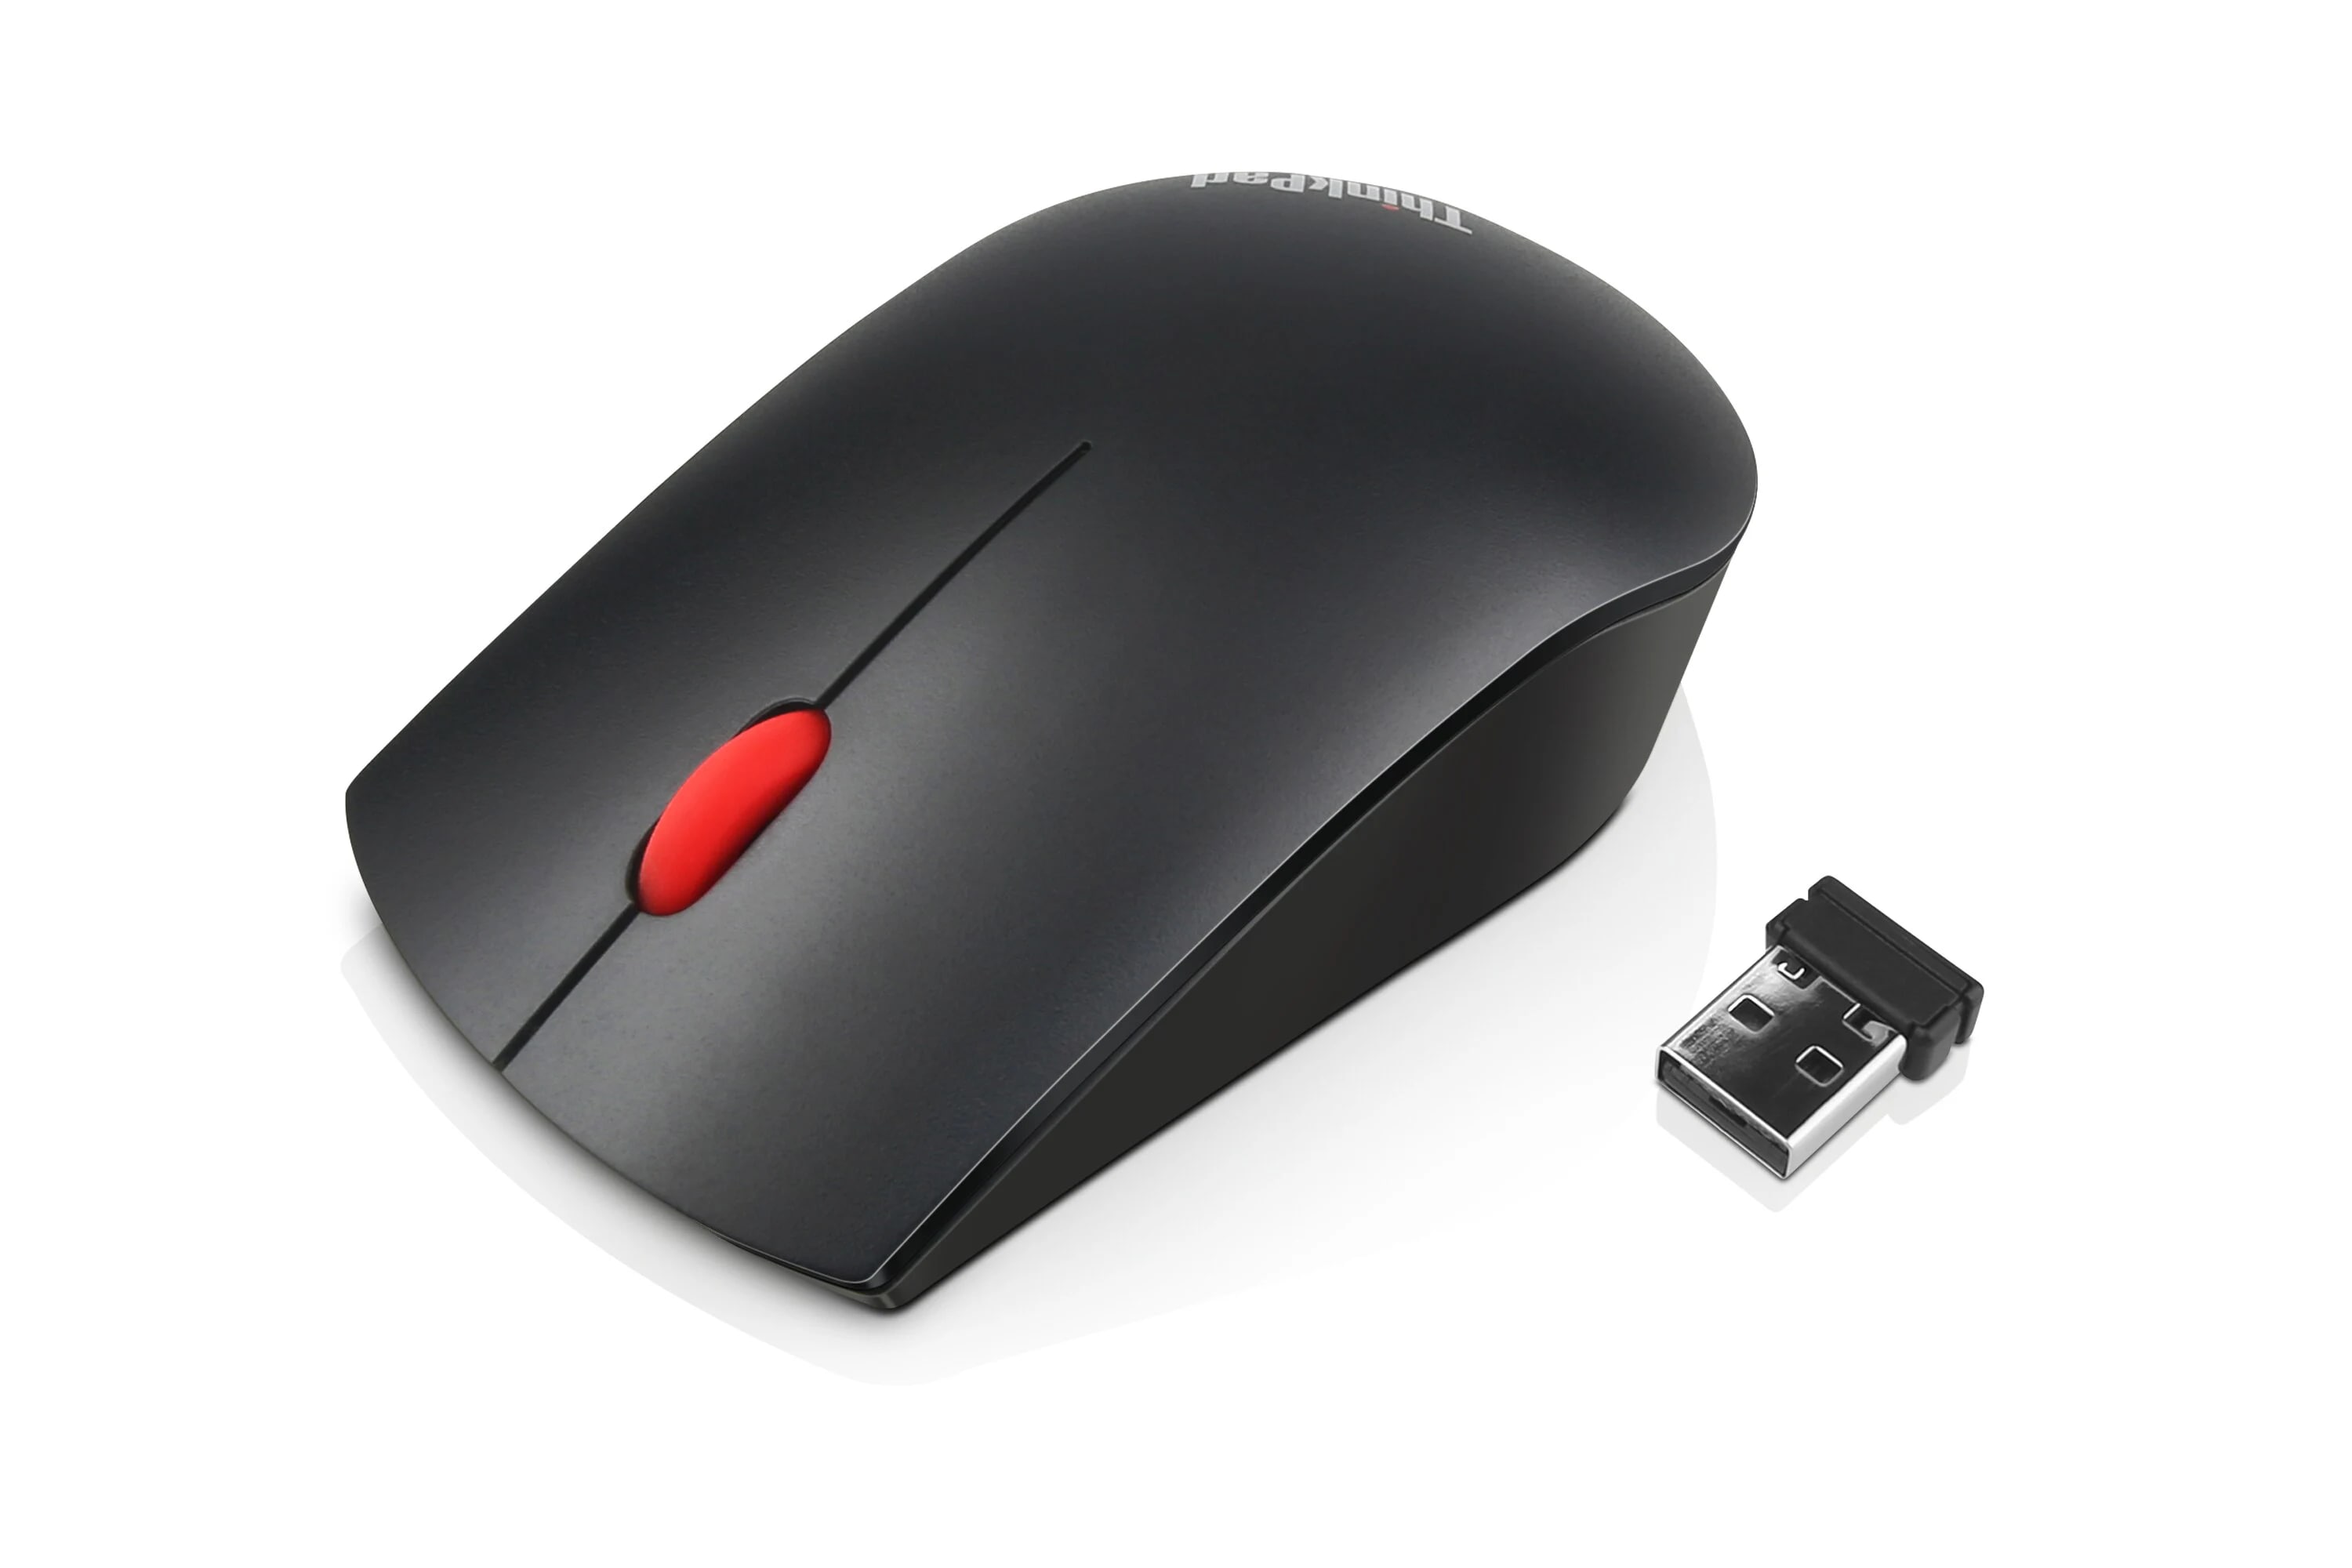 br-thinkpad-mouse-second